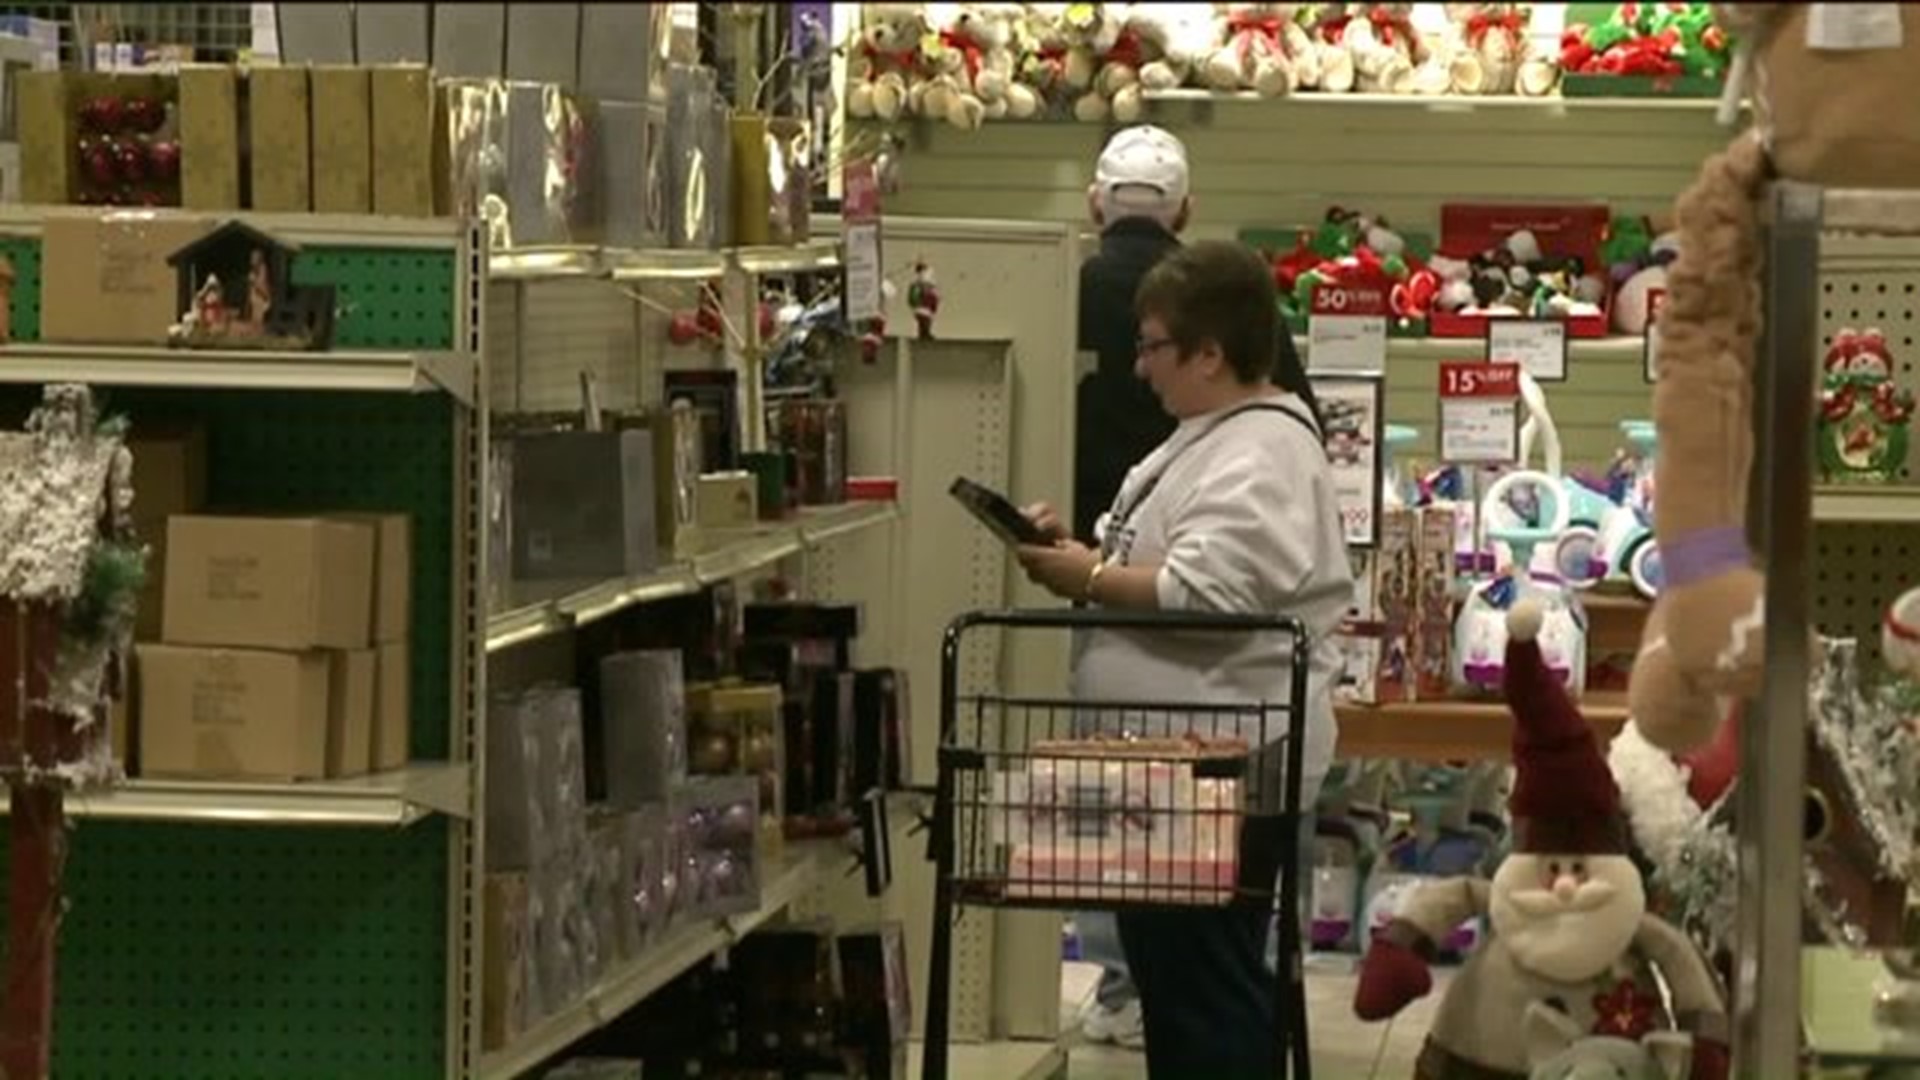 After Christmas, Holiday Shoppers Search for Deals at Stores